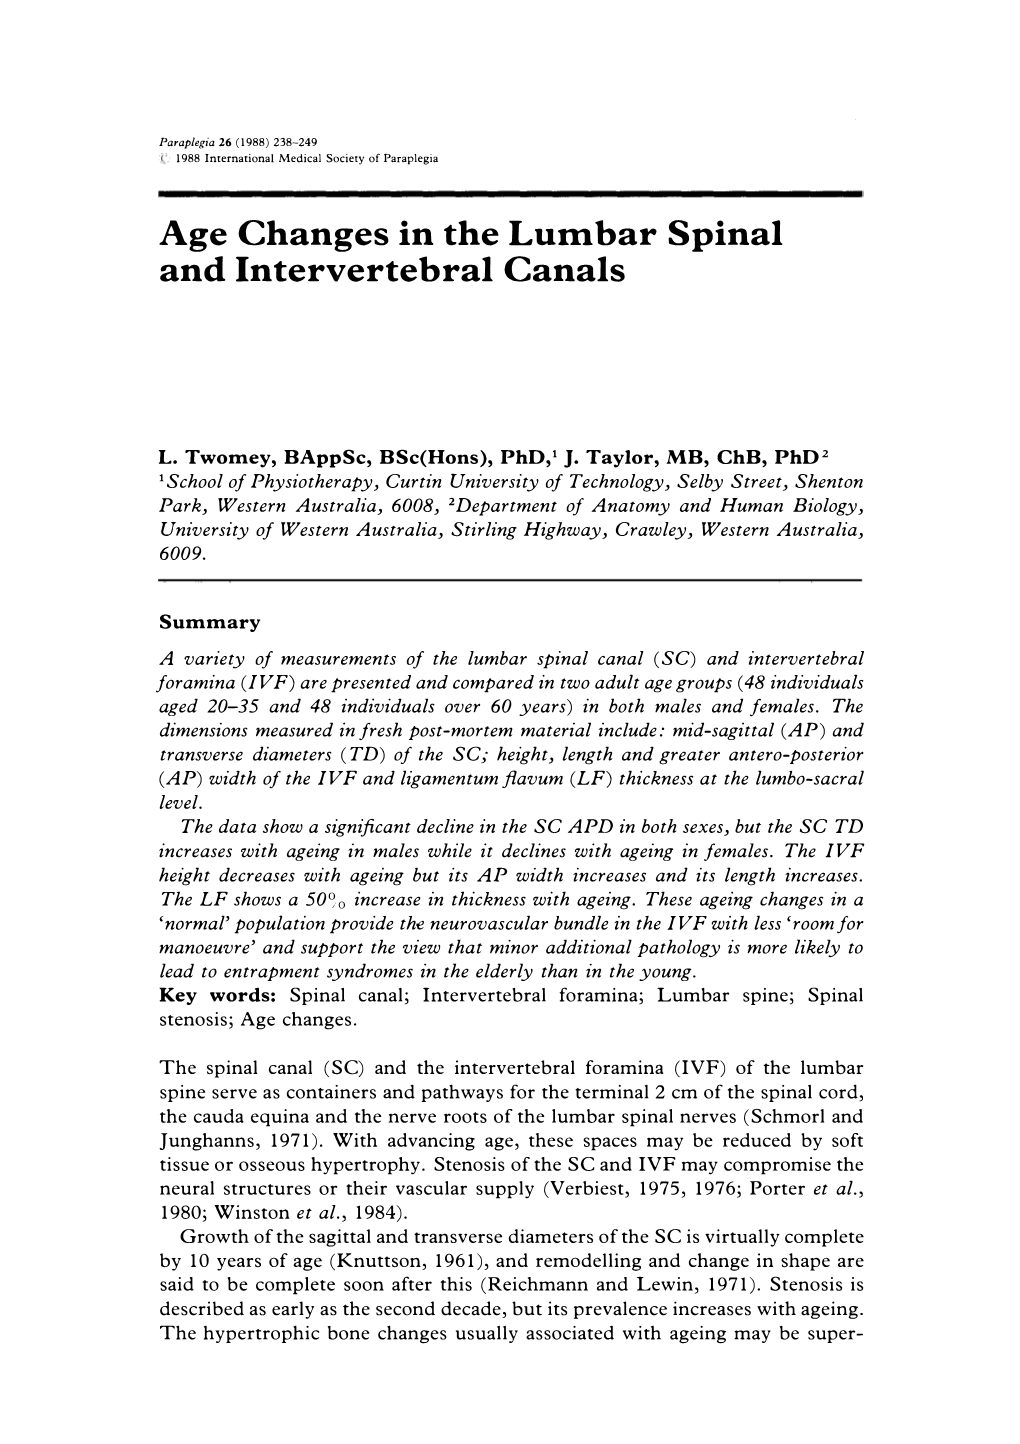 Age Changes in the Lumbar Spinal and Intervertebral Canals